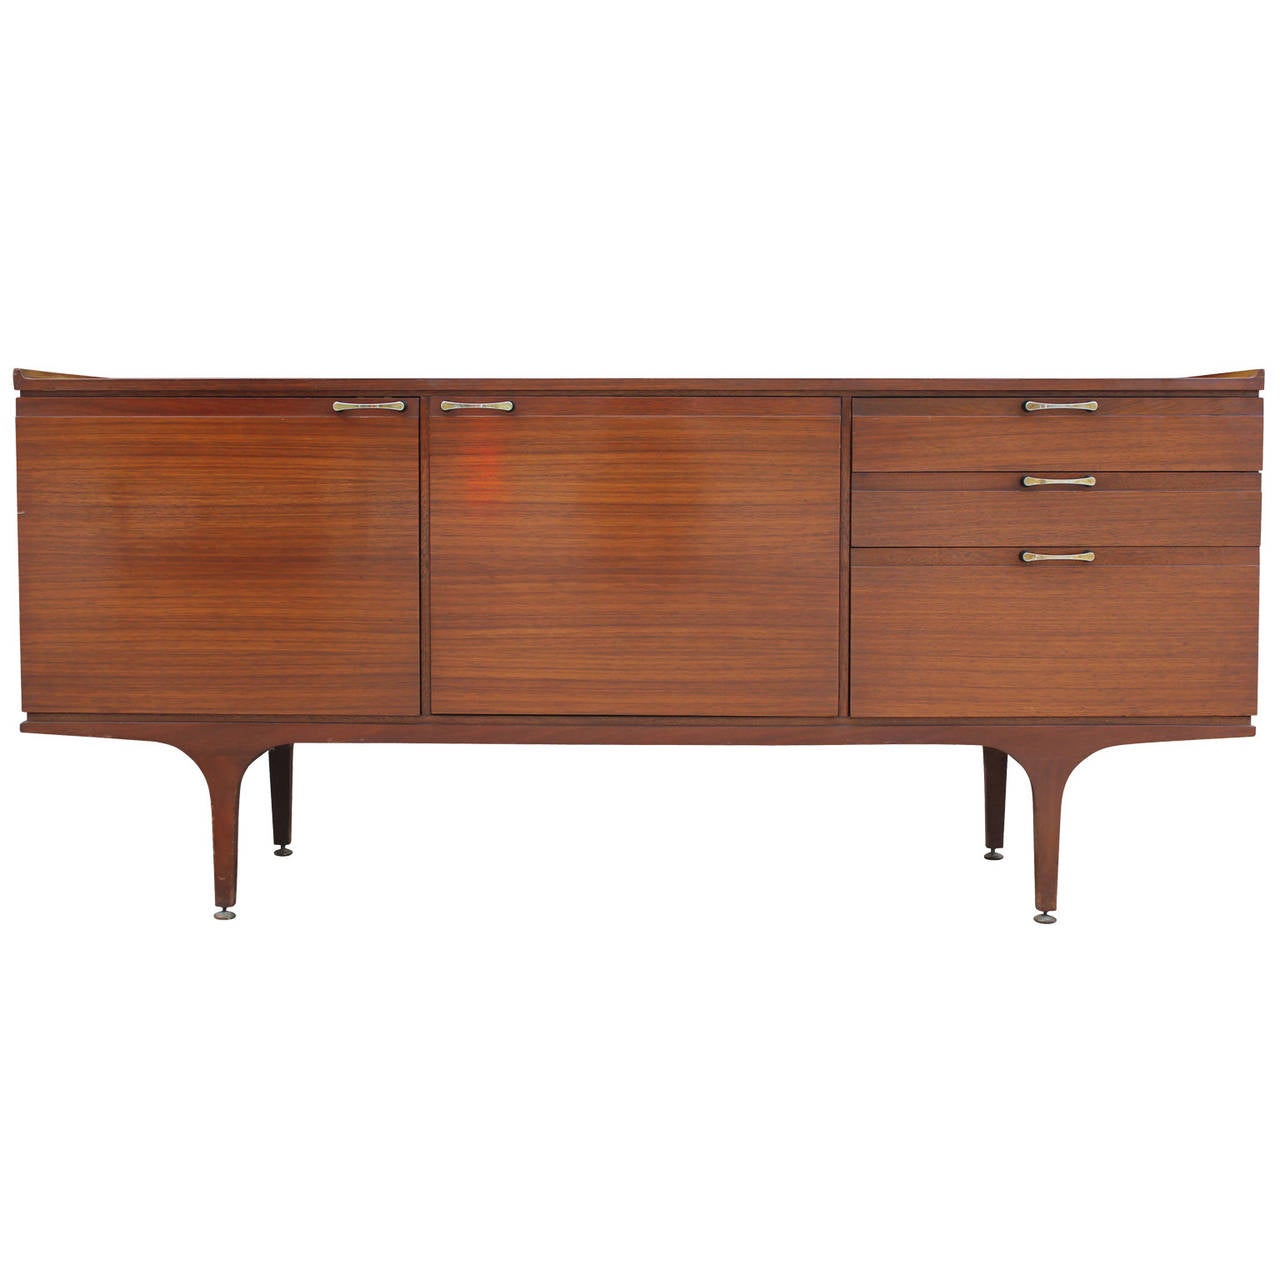 Beautiful credenza with an excellent grain. Top of sideboard curves up at the edges creating a decorative lip. Slightly curved brass handles compliment the lipped top and tapered legs. Brass levelers.